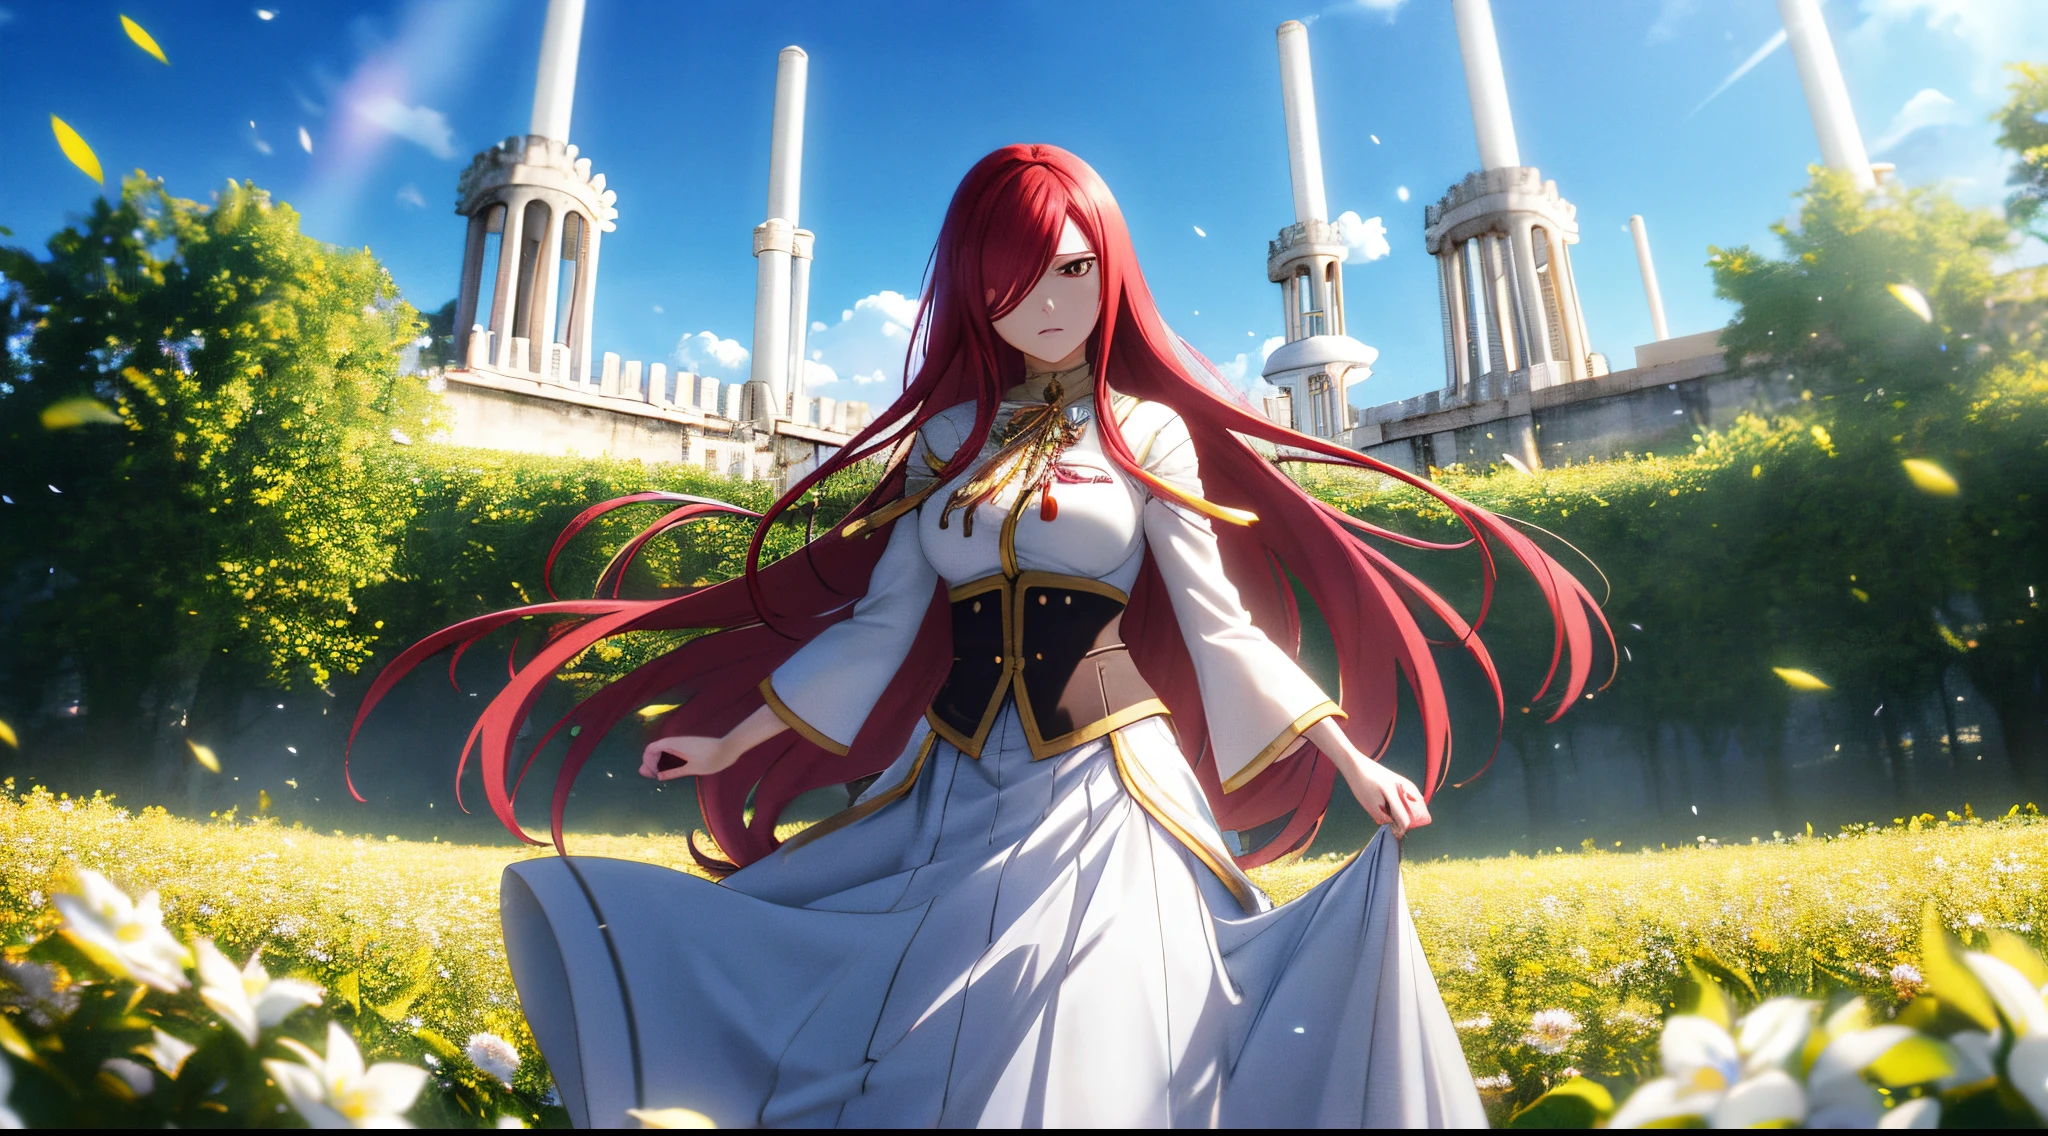 erza, 1girl, solo, long_hair, medium breasts,brown_eyes,red_hair,hair over one eye, standing, looking at viewer, white saint cloth, praying beads on neck, long skirt, flowers field athens temple, anime style,deep depth of field,wide angle view,Lumen Reflections,Screen Space Reflections,Diffraction Grading,Chromatic Aberration,GB Displacement,Scan Lines,Ray Traced,Anti-Aliasing,FXAA,TXAA,RTX,SSAO,Shaders,OpenGL-Shaders,GLSL-Shaders,Post Processing,Post-Production,cell Shading,Tone Mapping,CGI,VFX,SFX,insanely detailed and intricate, 4K